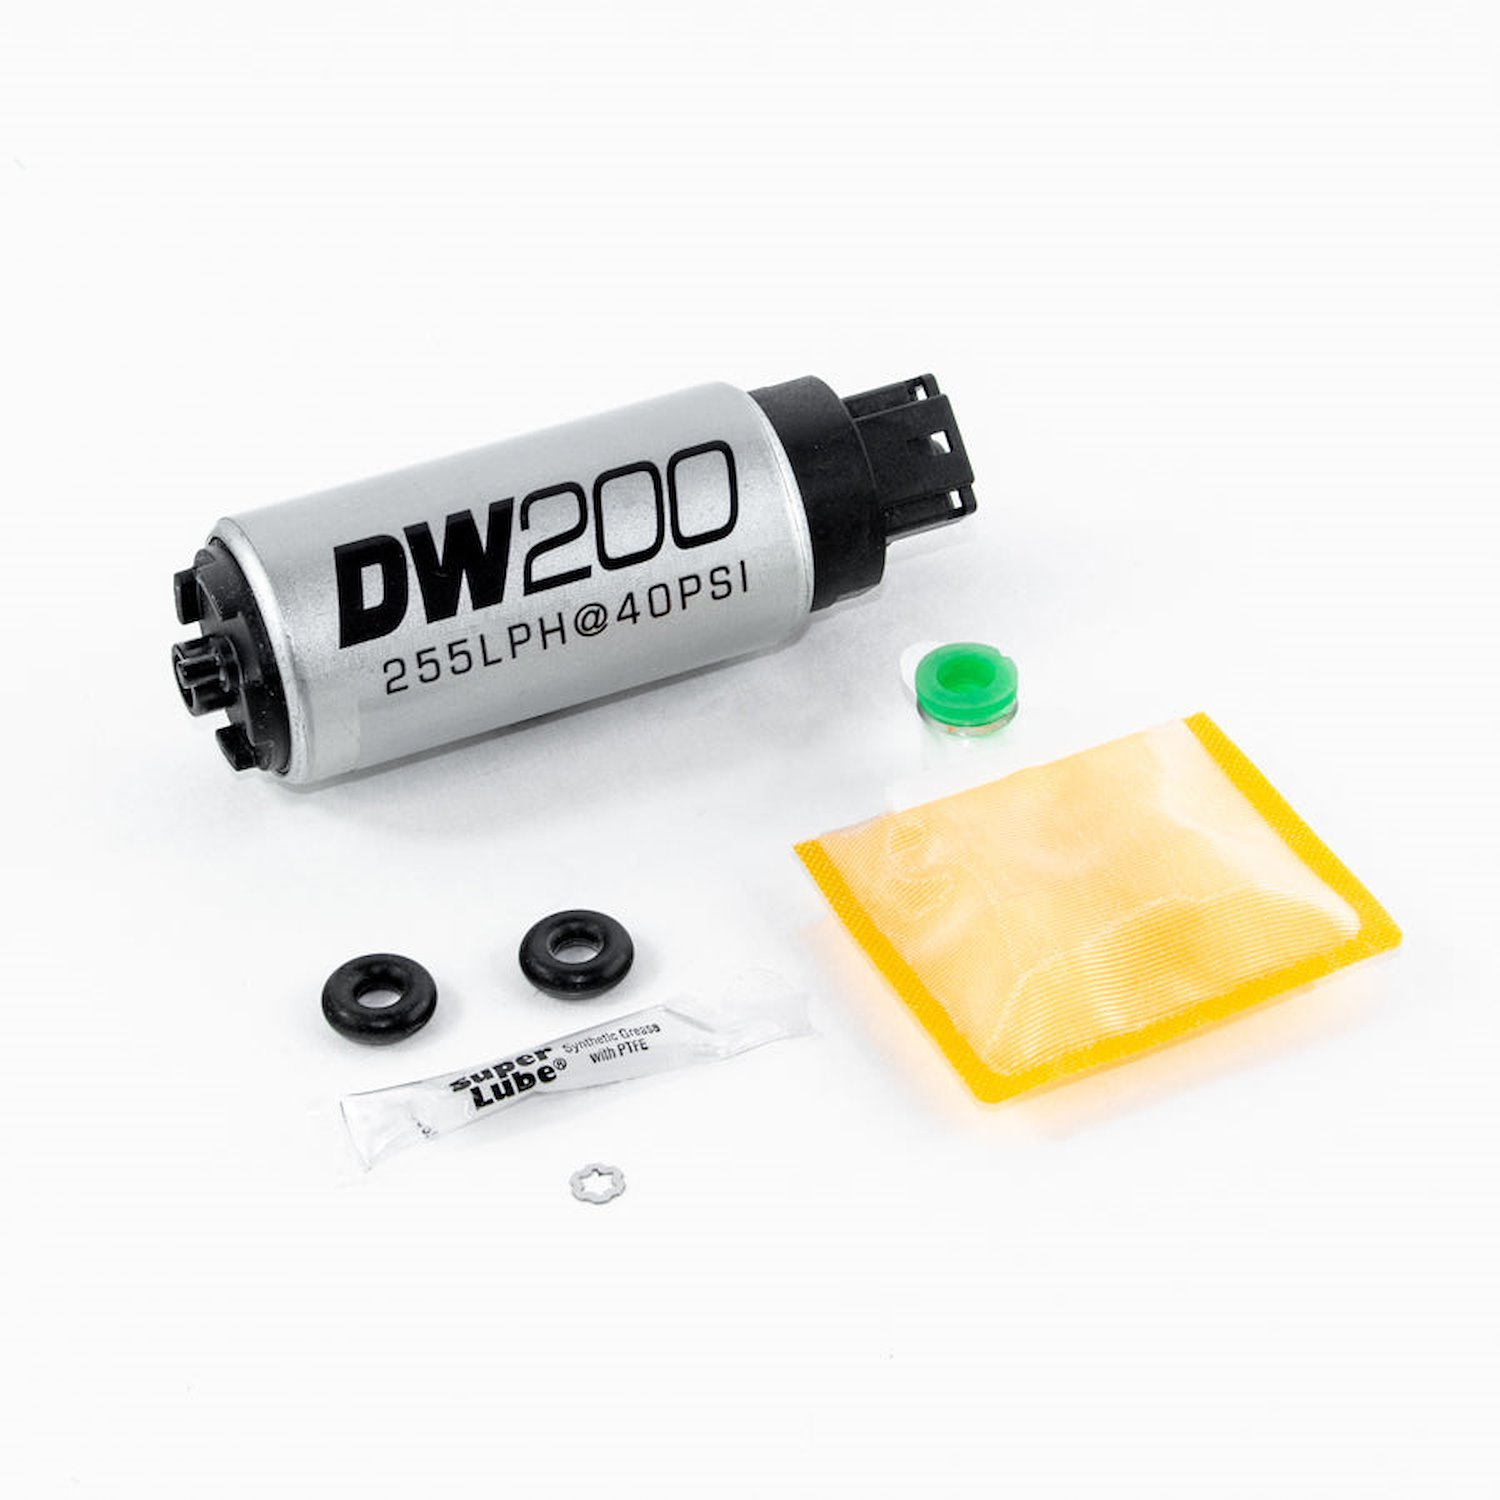 92010847 DW200 series 255lph in-tank fuel pump w/ install kit for Eclipse (turbo AWD) 95-98 and EVO 8/9 2003-2006